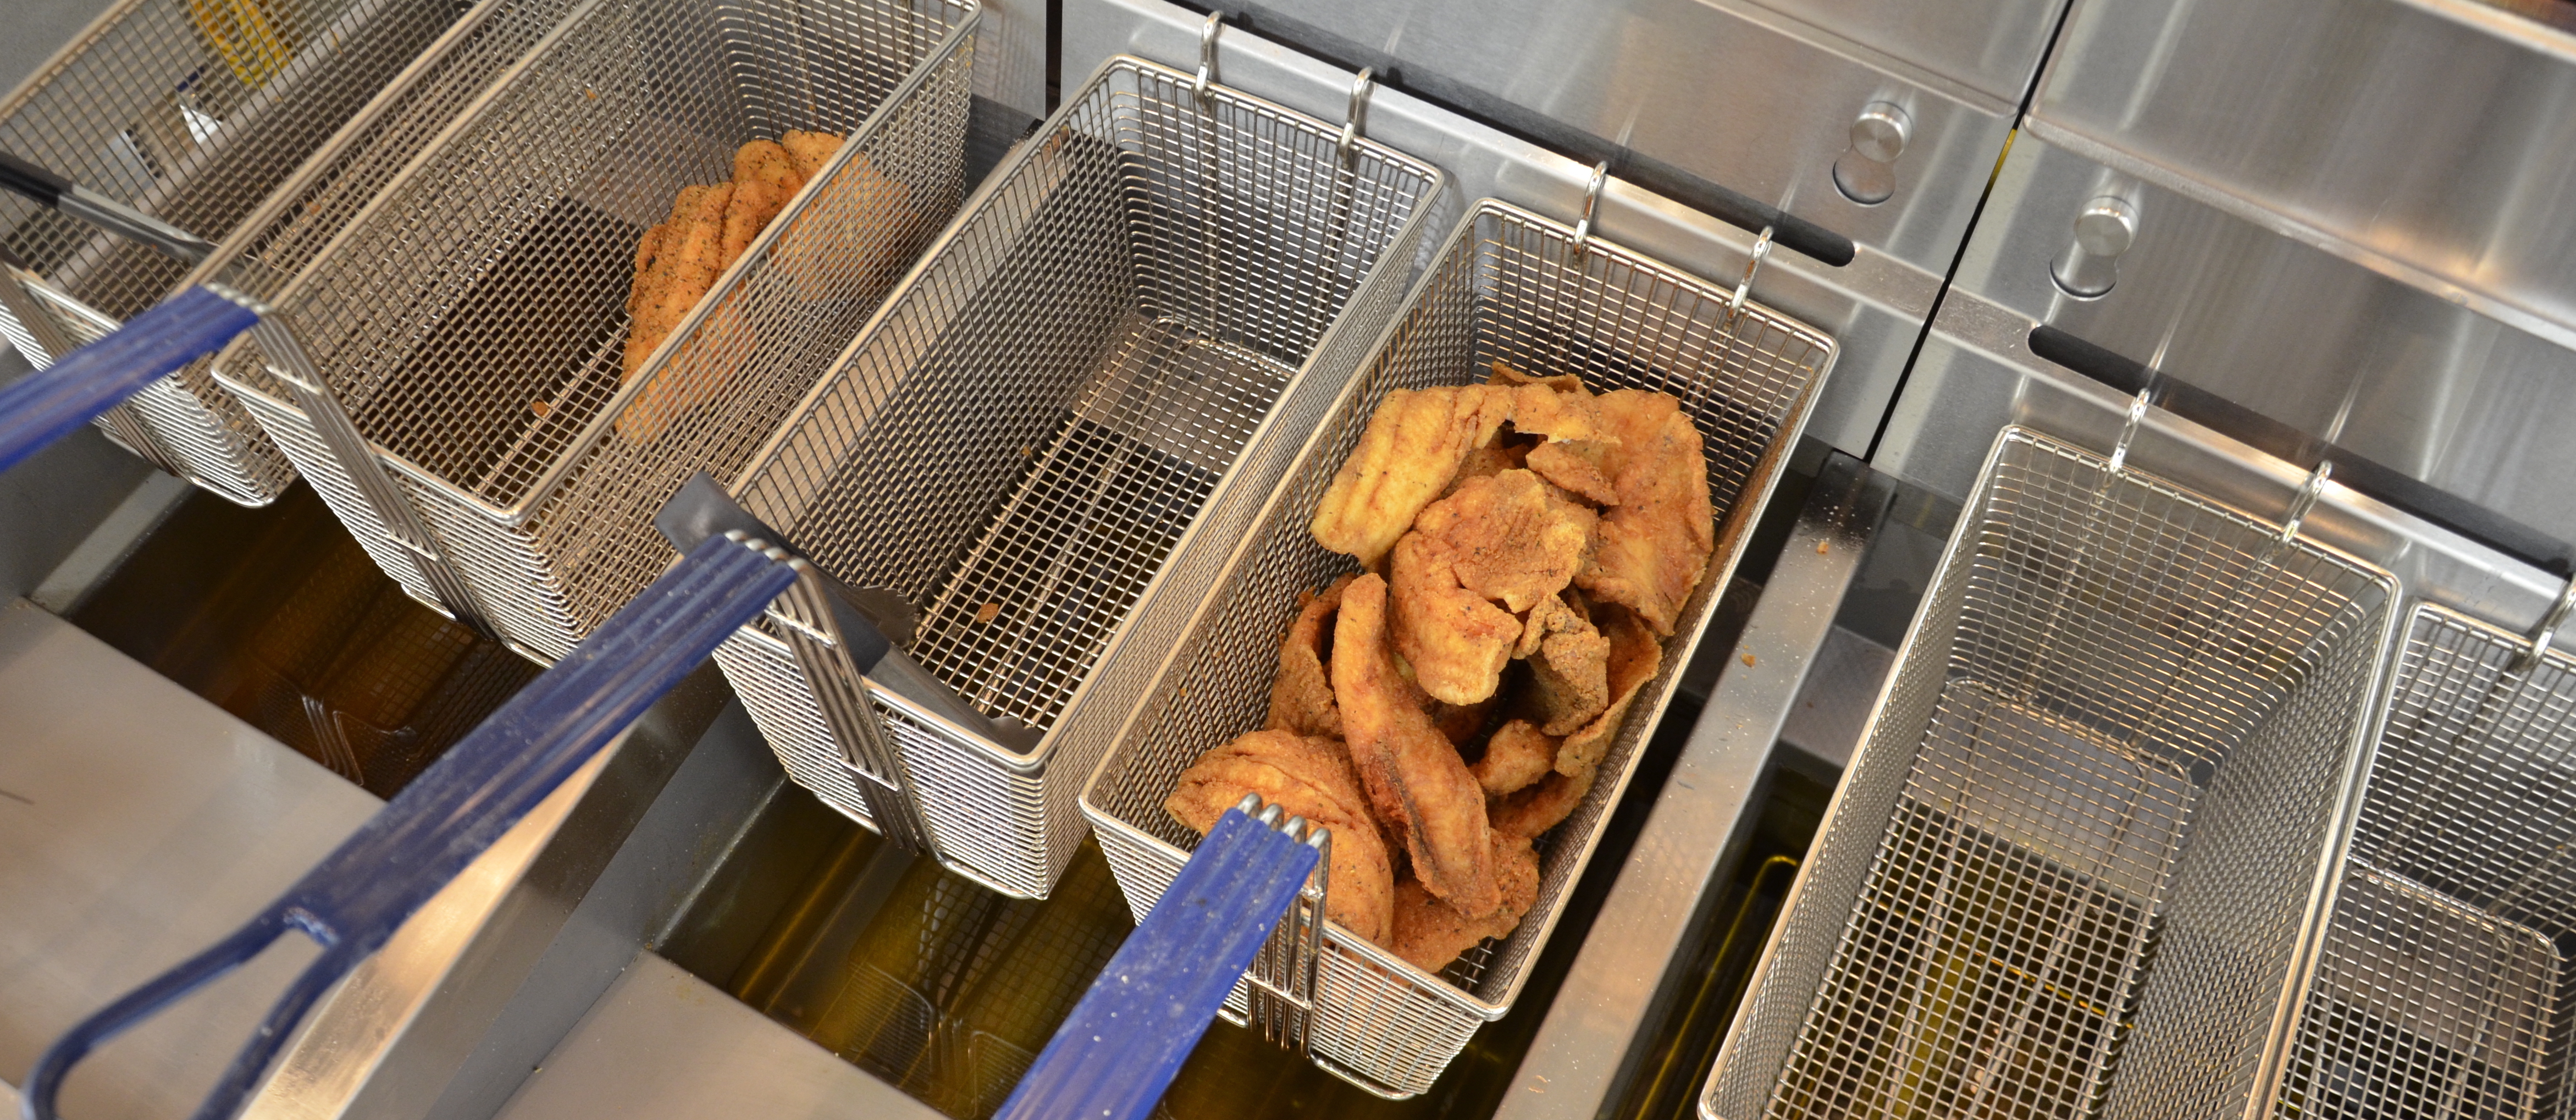 How to Clean a Commercial Deep Fryer  Fryer Cleaning Directions